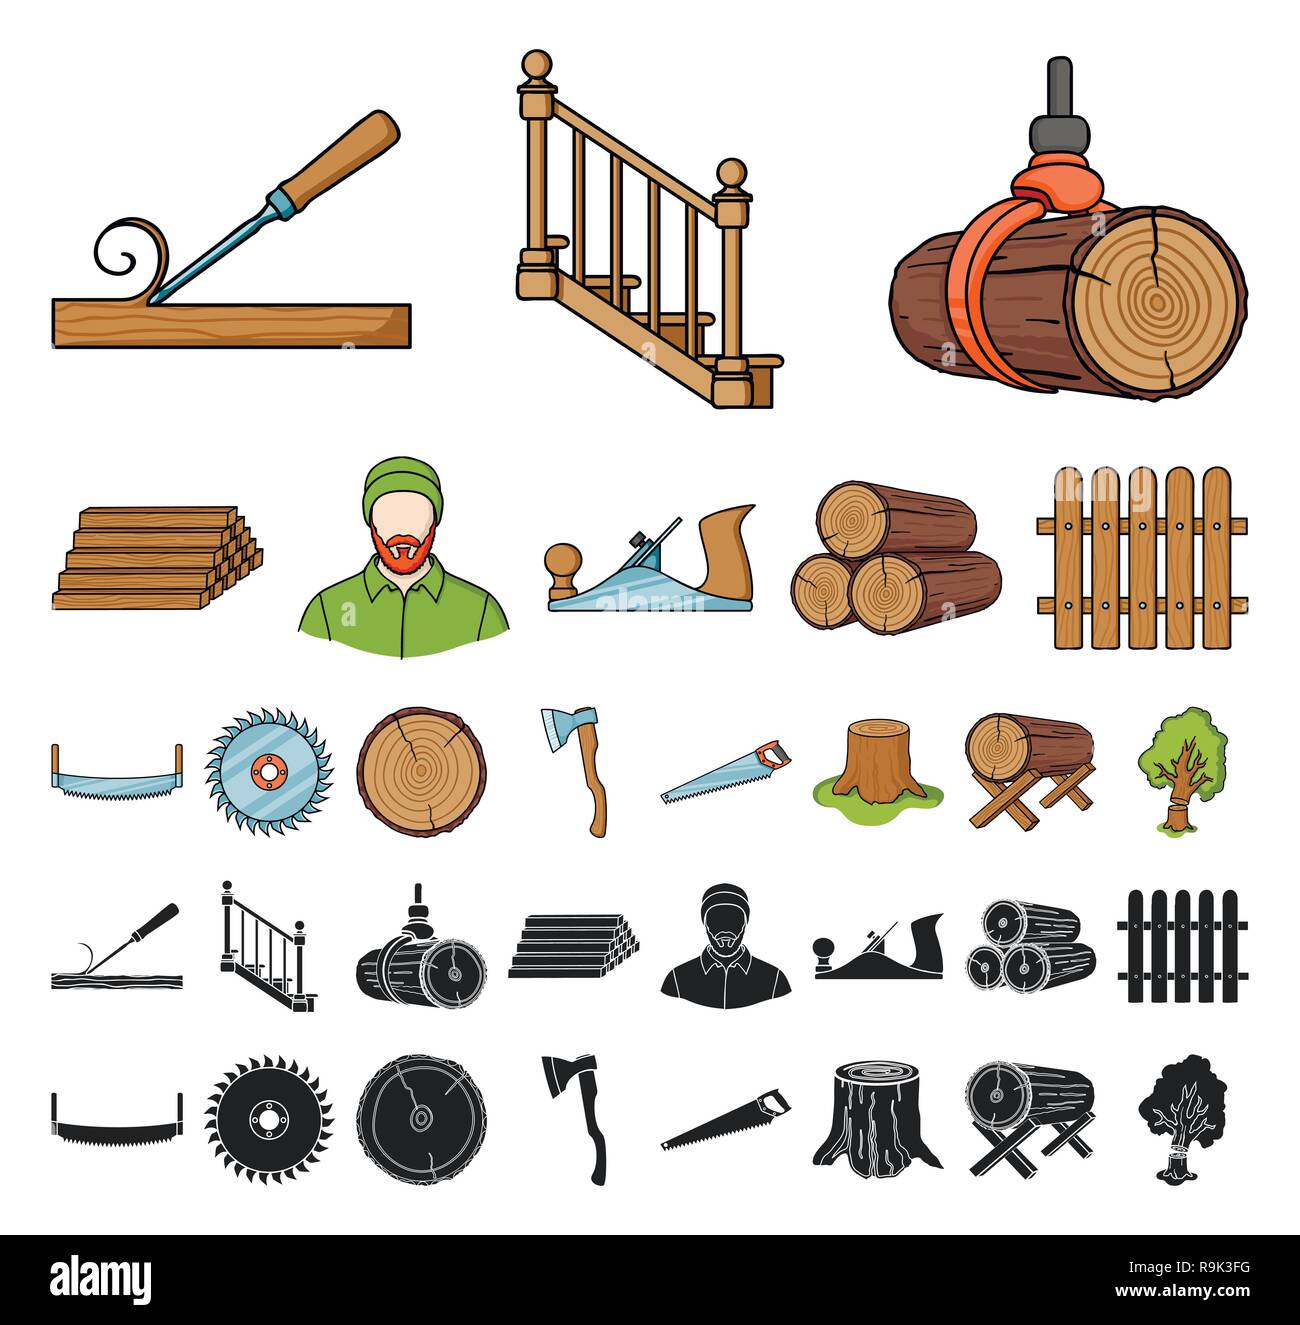 art,axe,cartoon,black,chisel,collection,crane,cross,design,disc,equipment,falling,fence,goats,hand,hydraulic,icon,illustration,isolated,jack,logo,logs,lumber,lumbers,lumbrejack,plane,processing,product,production,saw,sawing,sawmill,section,set,sign,stack,stairs,stump,symbol,timber,tools,tree,two-man,vector,web Vector Vectors , Stock Vector